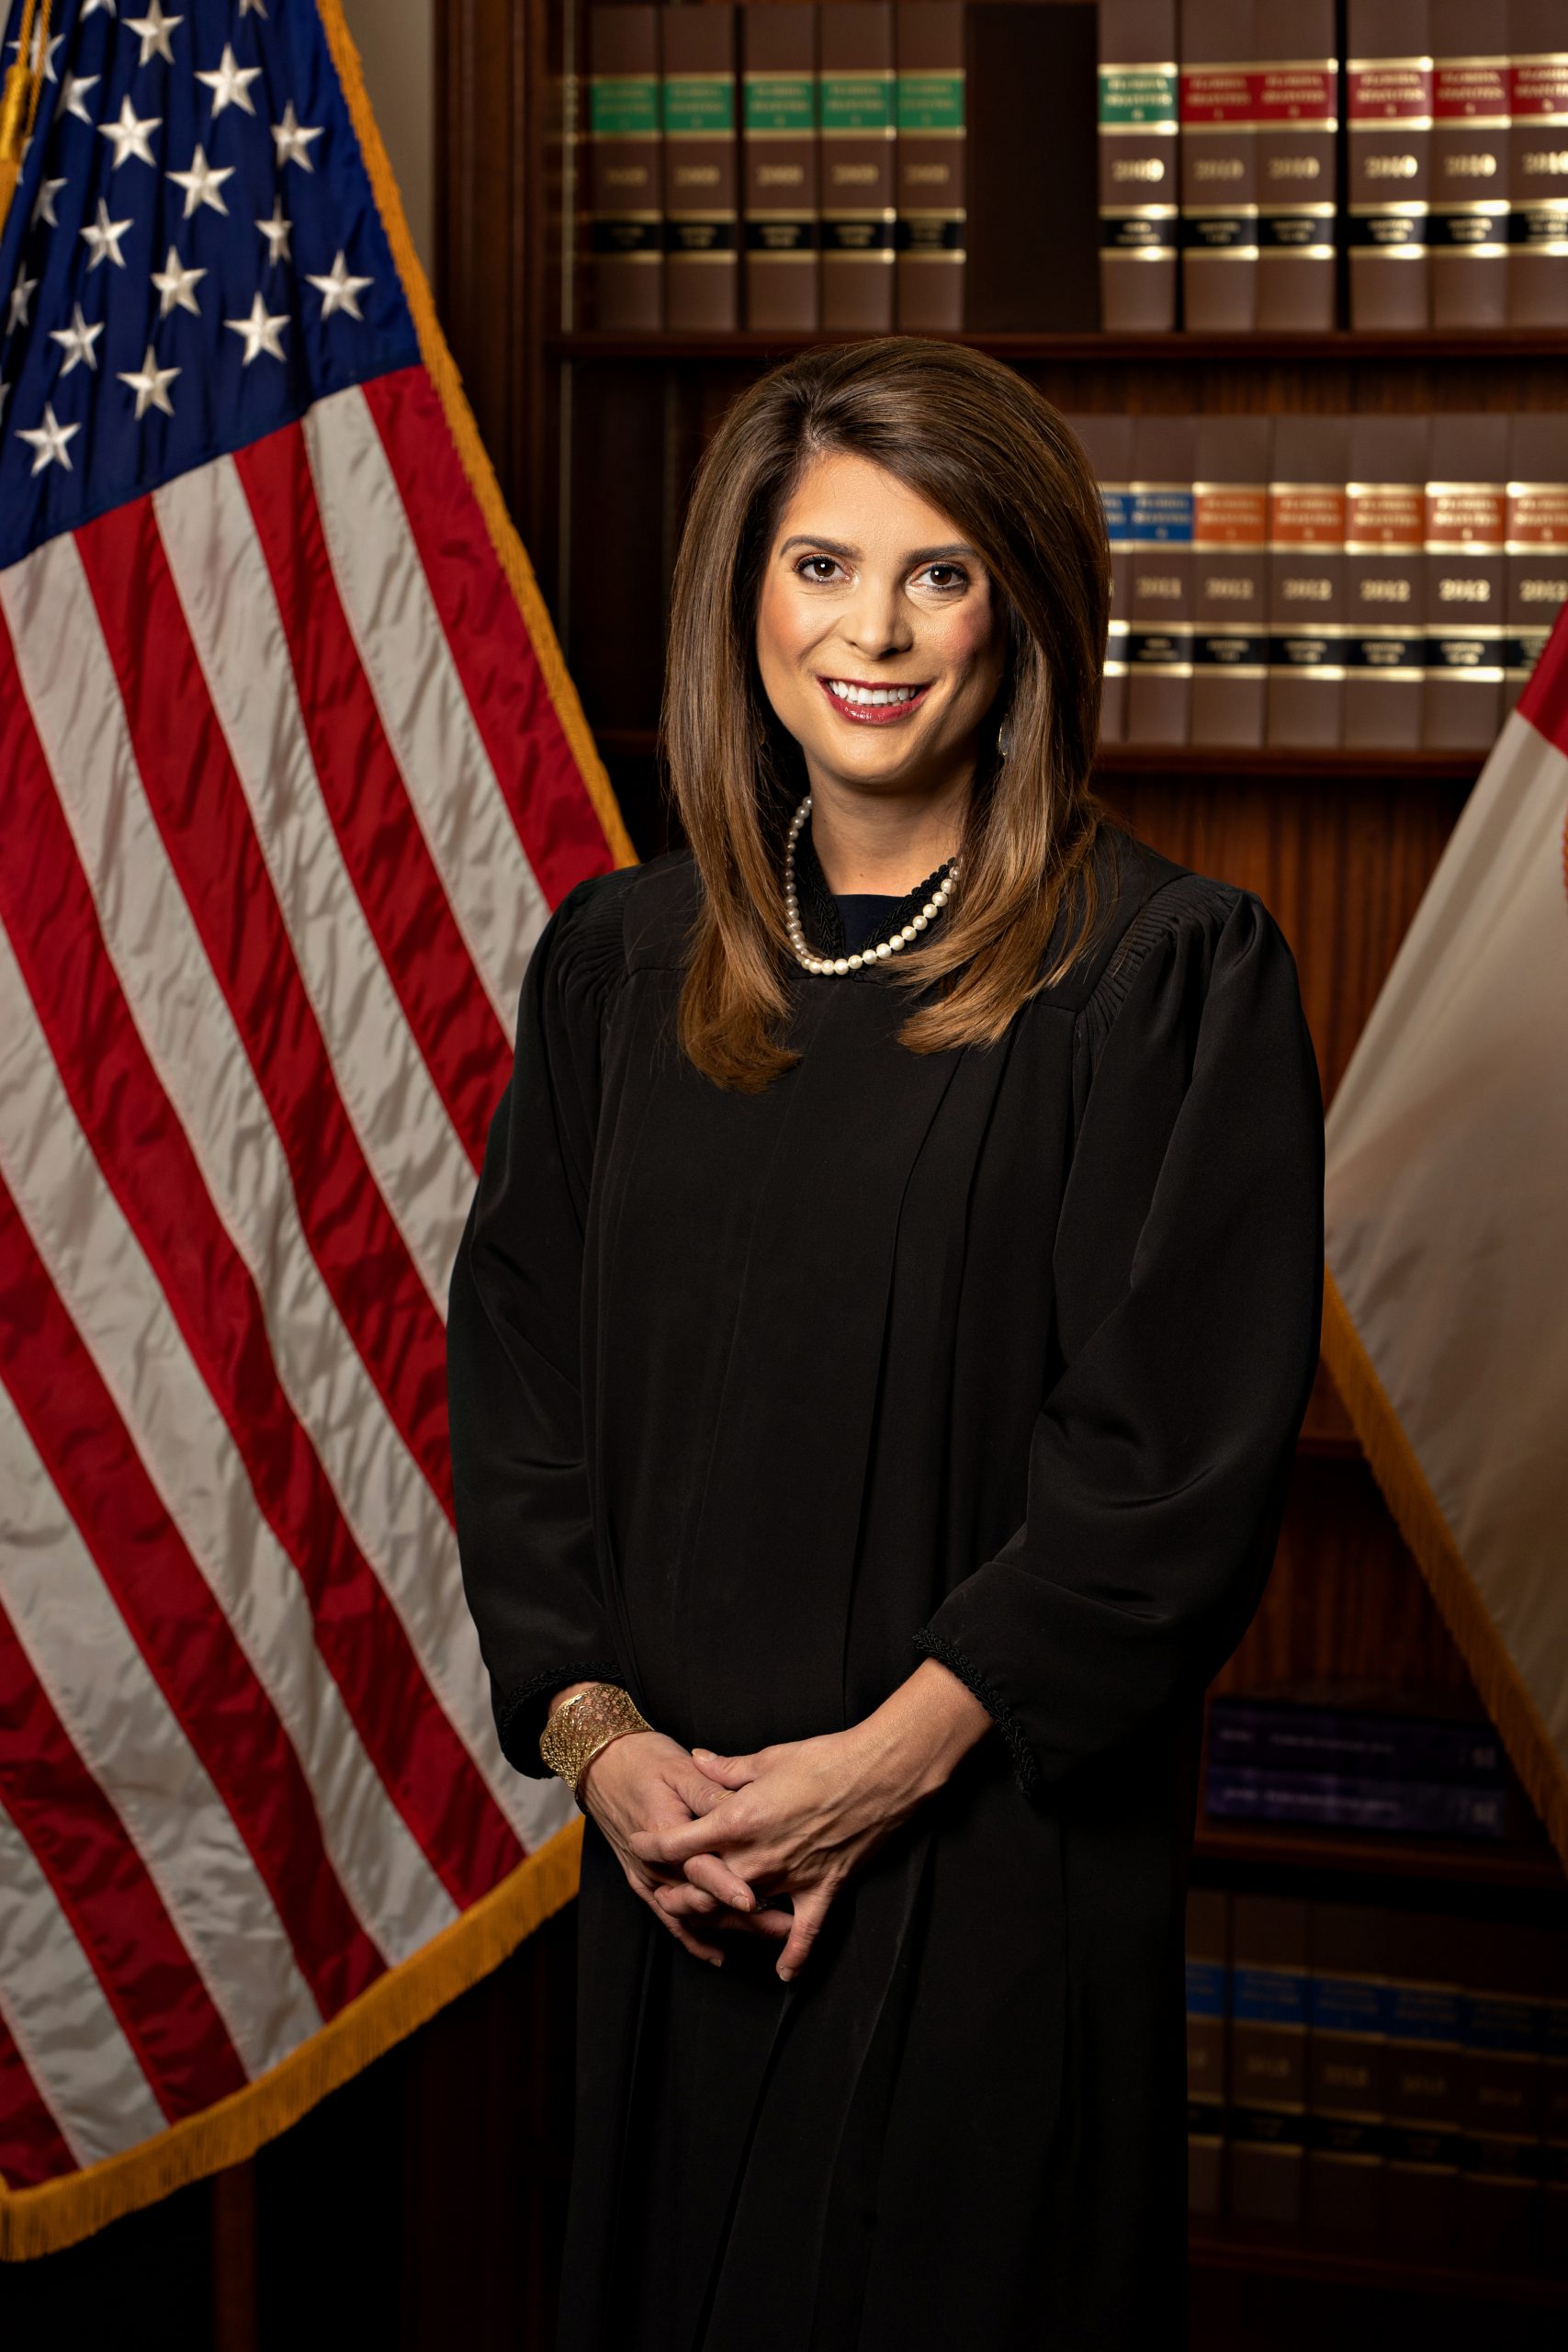 April Newsmaker Interview Series at SF to Feature Florida Supreme Court